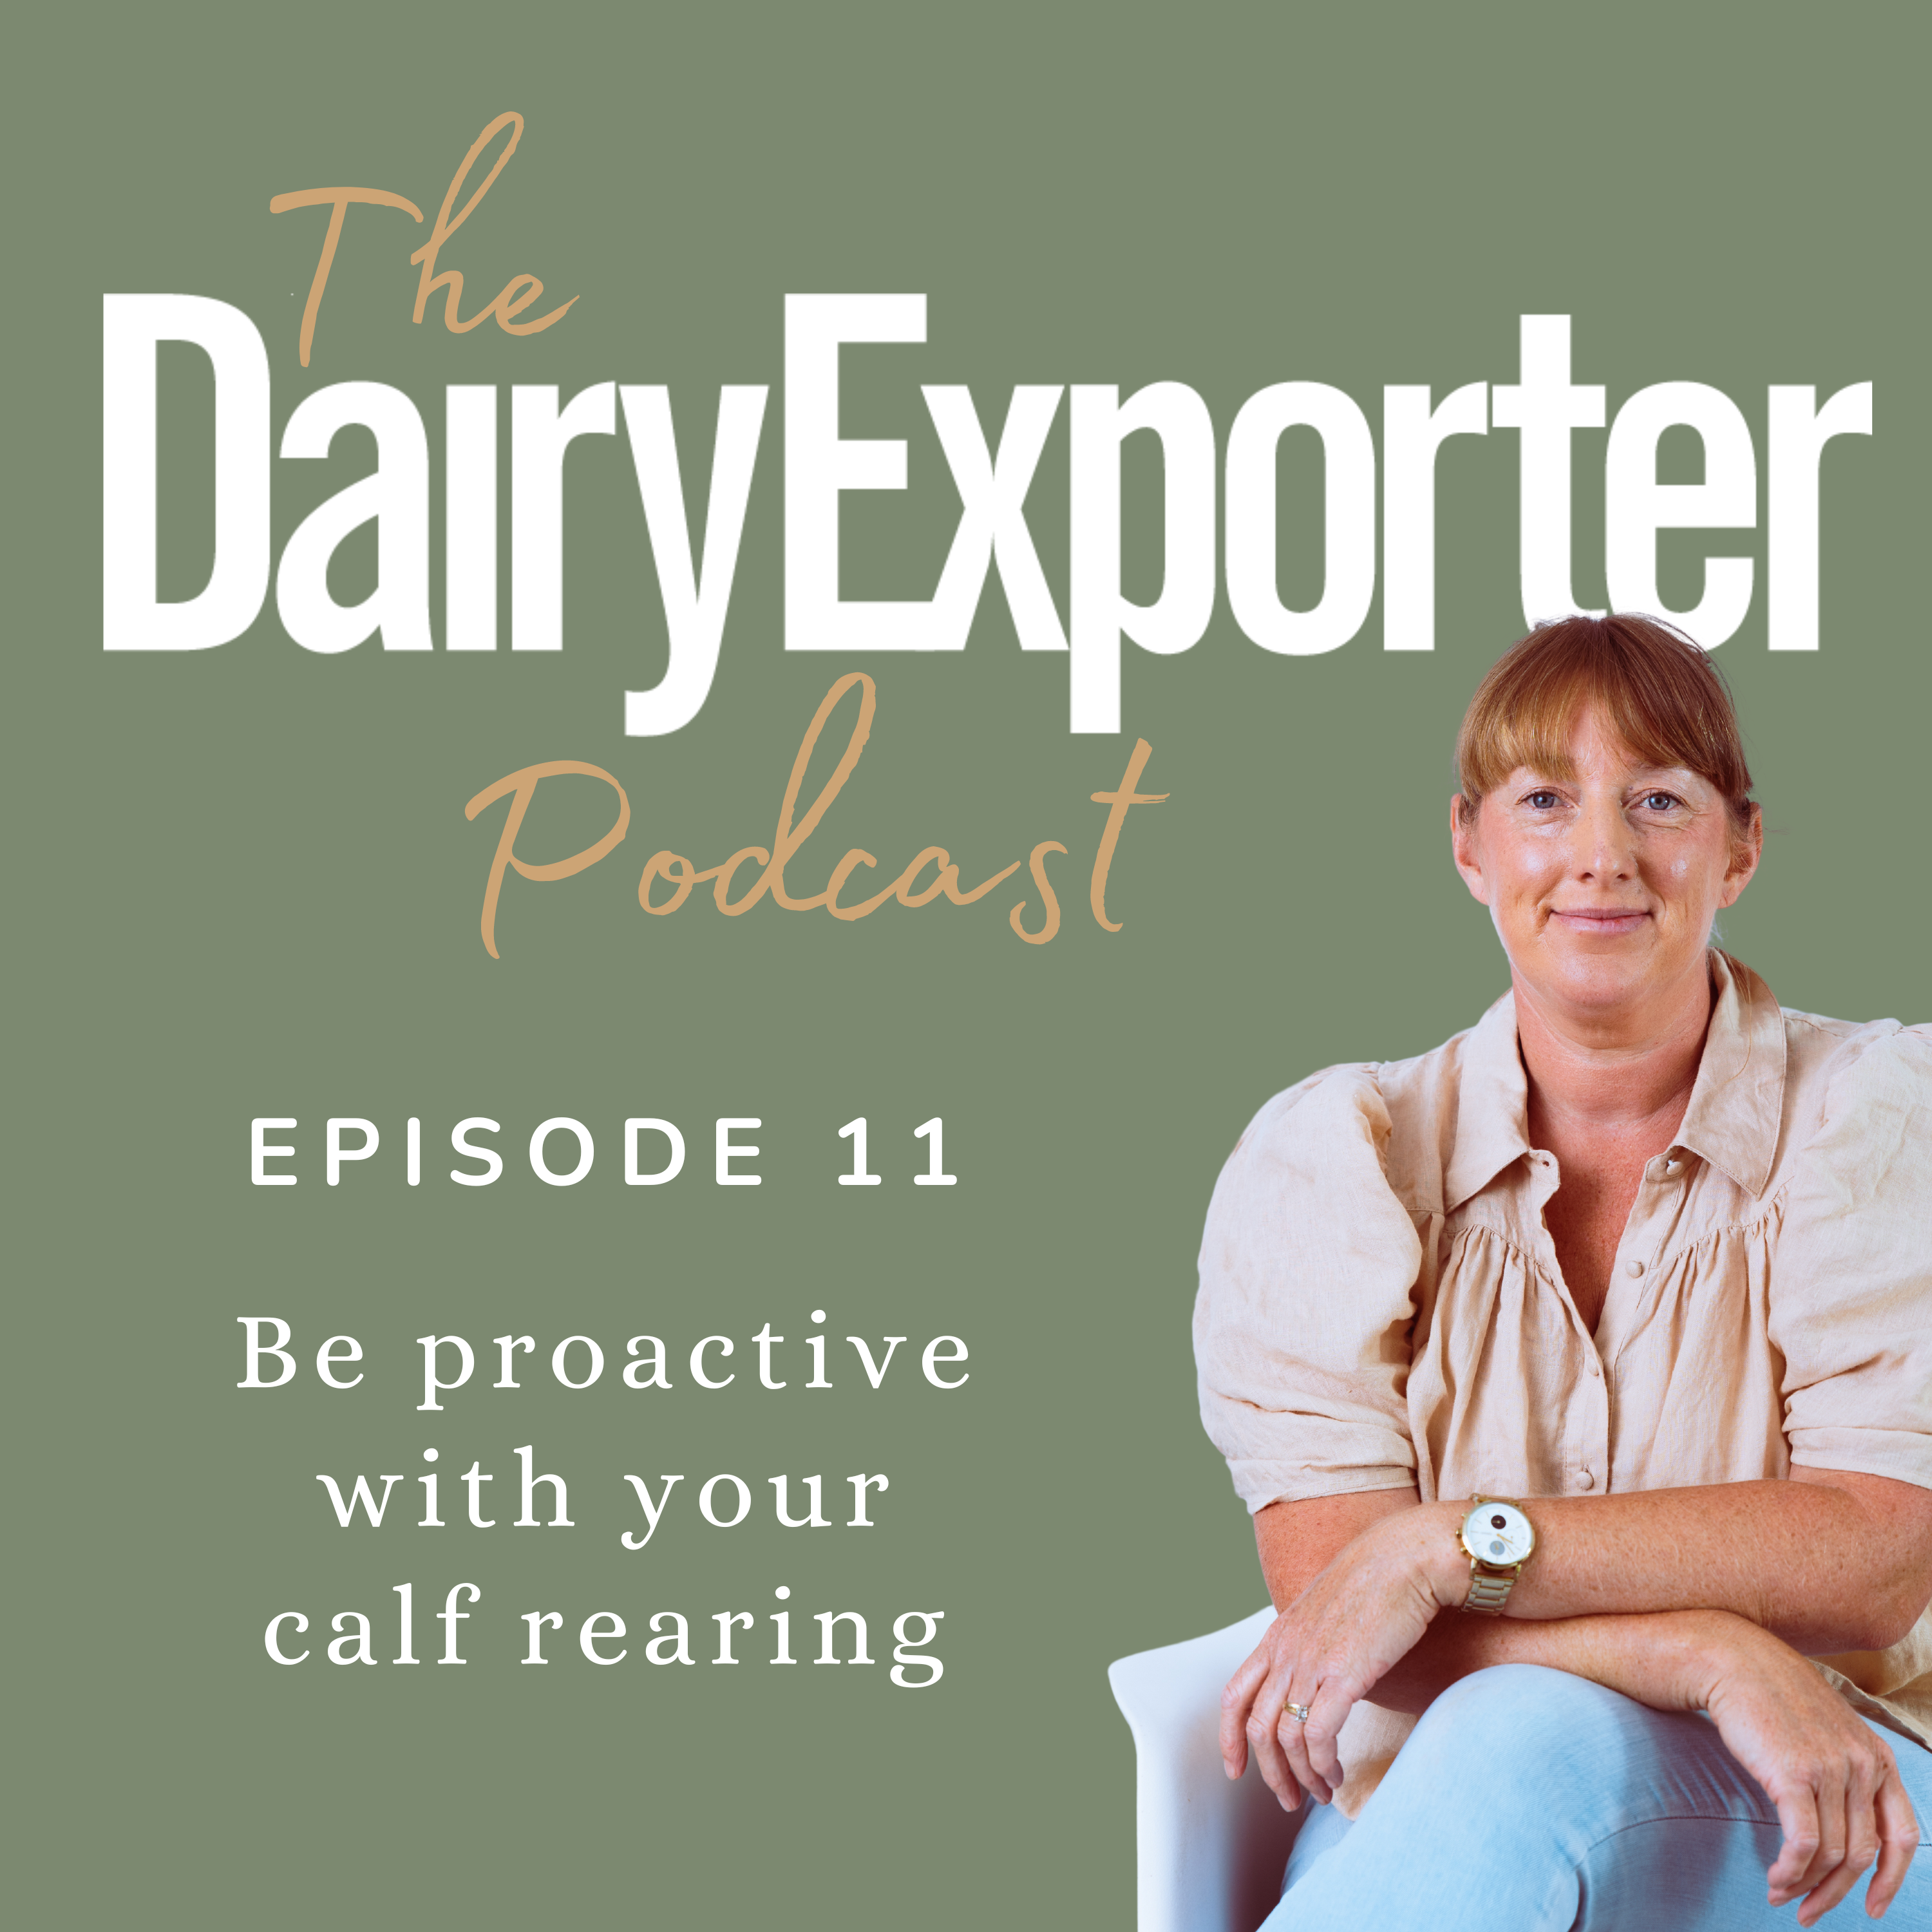 Episode 11 - Be proactive with your calf rearing